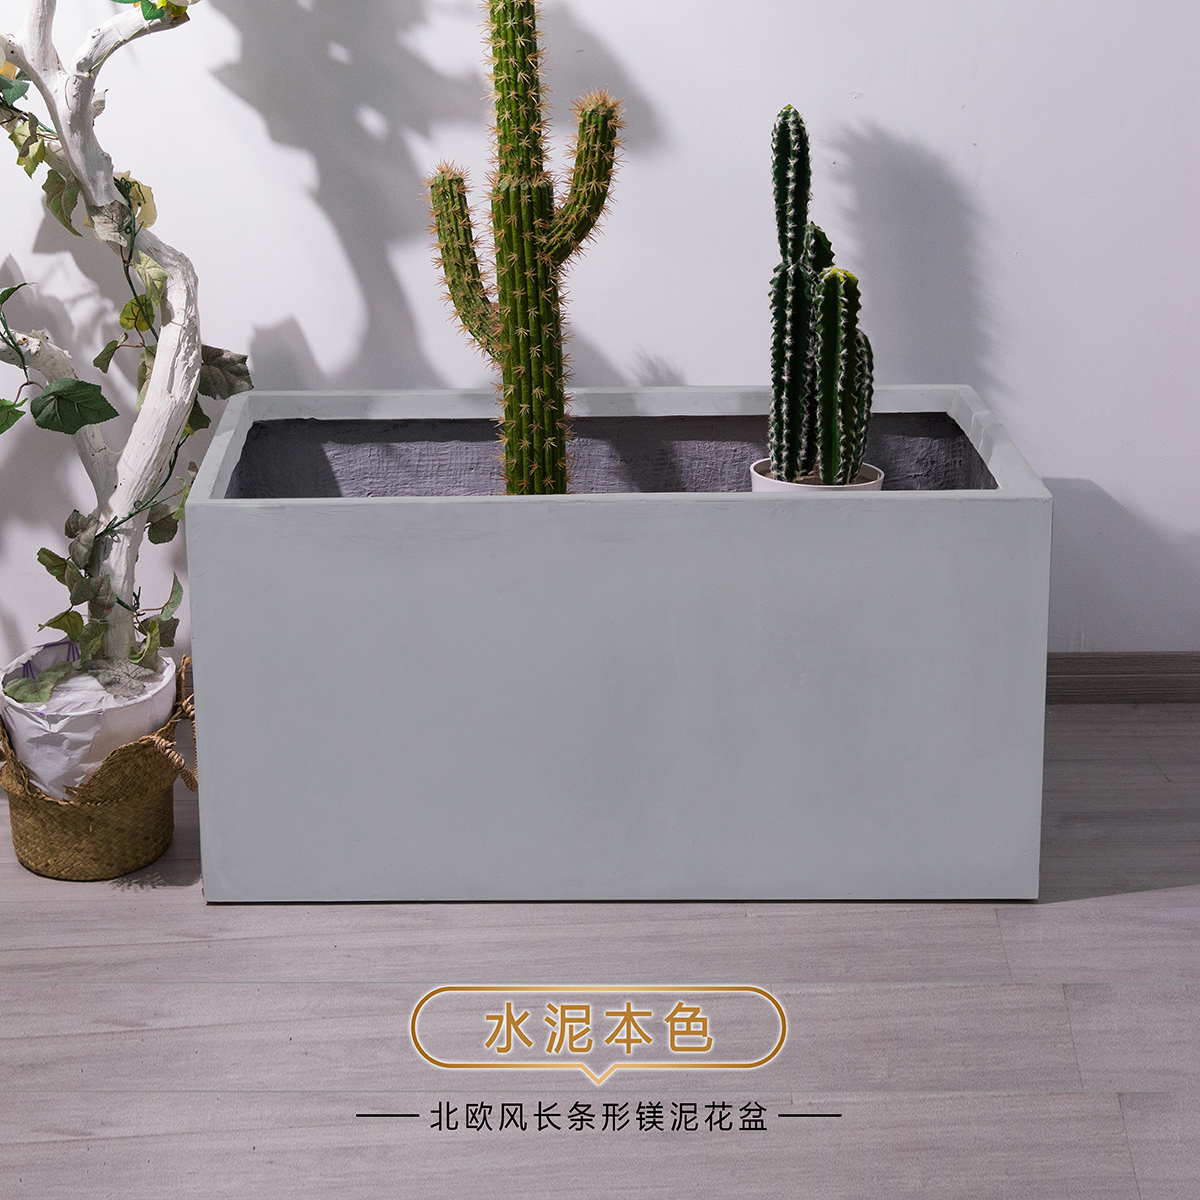 Rectangular cement flowerpot northern European long -striped mileage living room balcony outdoor vegetable magnesium mud lattice large green plant cabinet